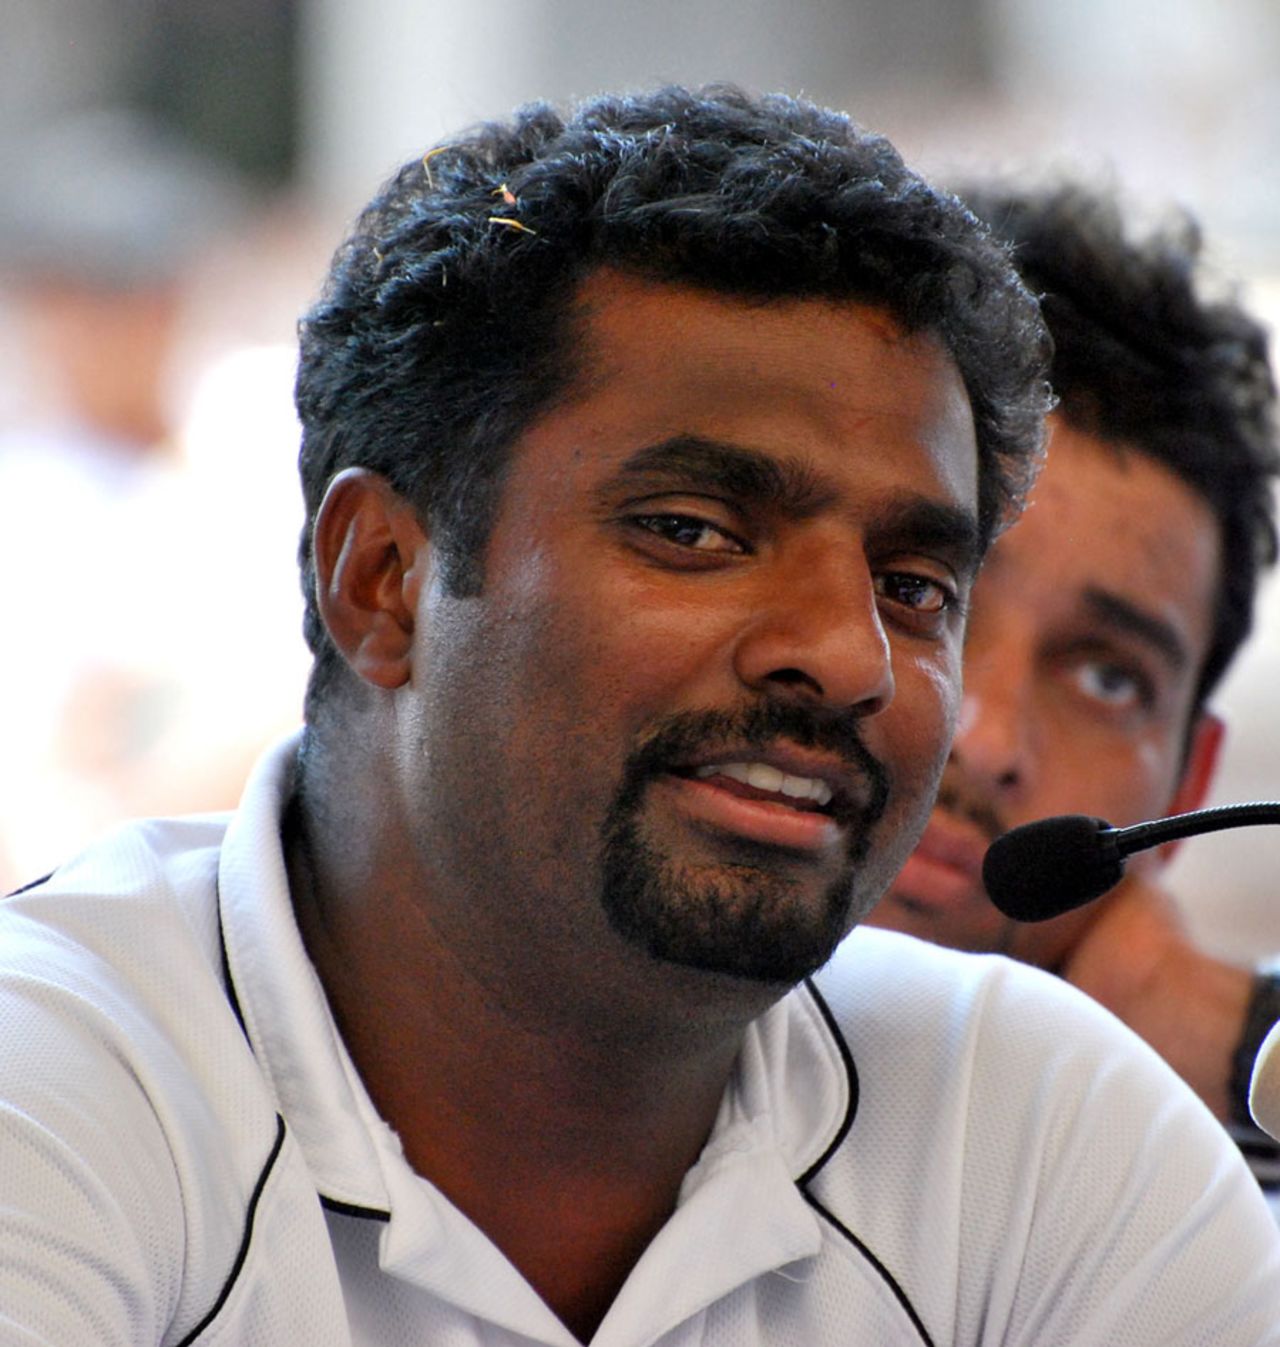 Muttiah Muralitharan addresses the media in Colombo after returning from the World Cup, April 3, 2011